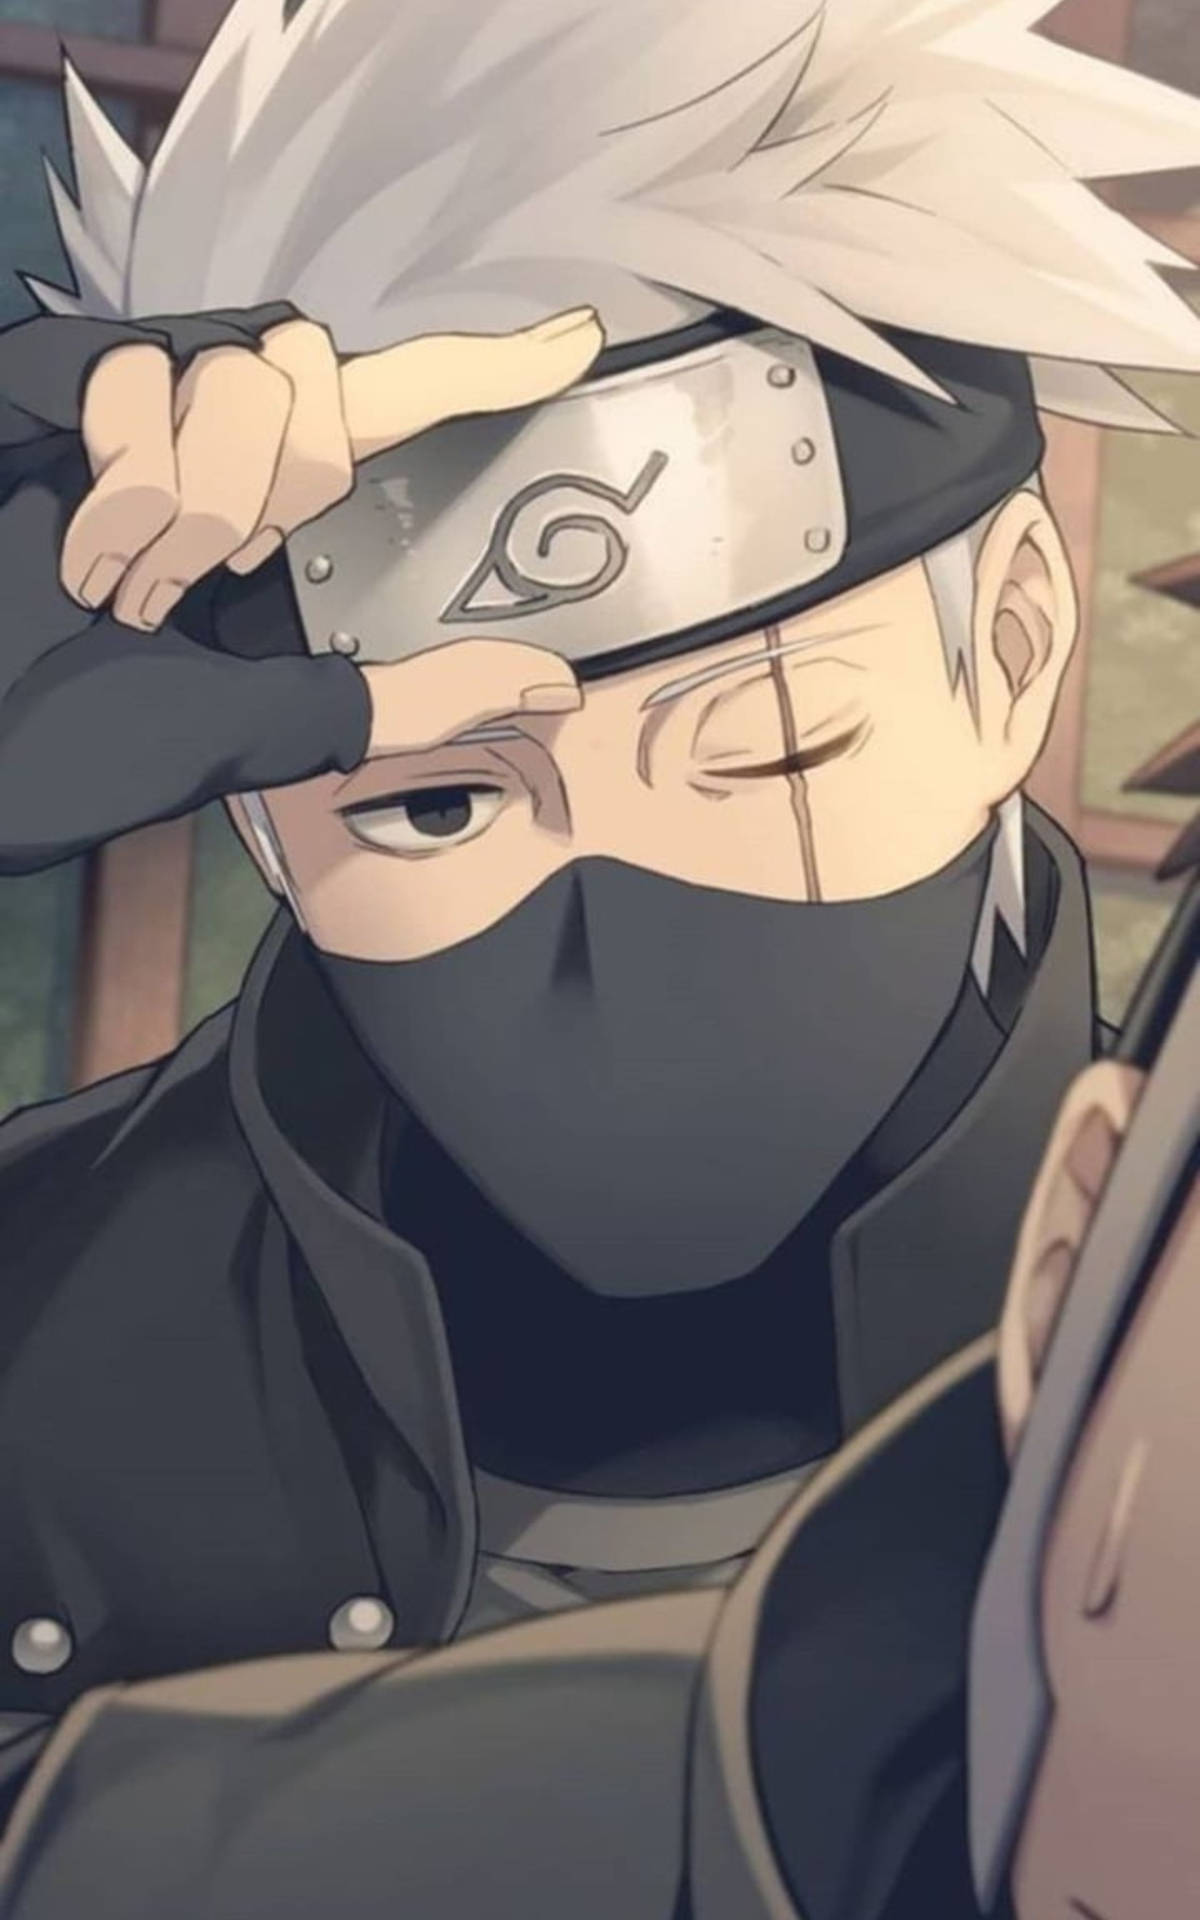 Cool Wink From Kakashi